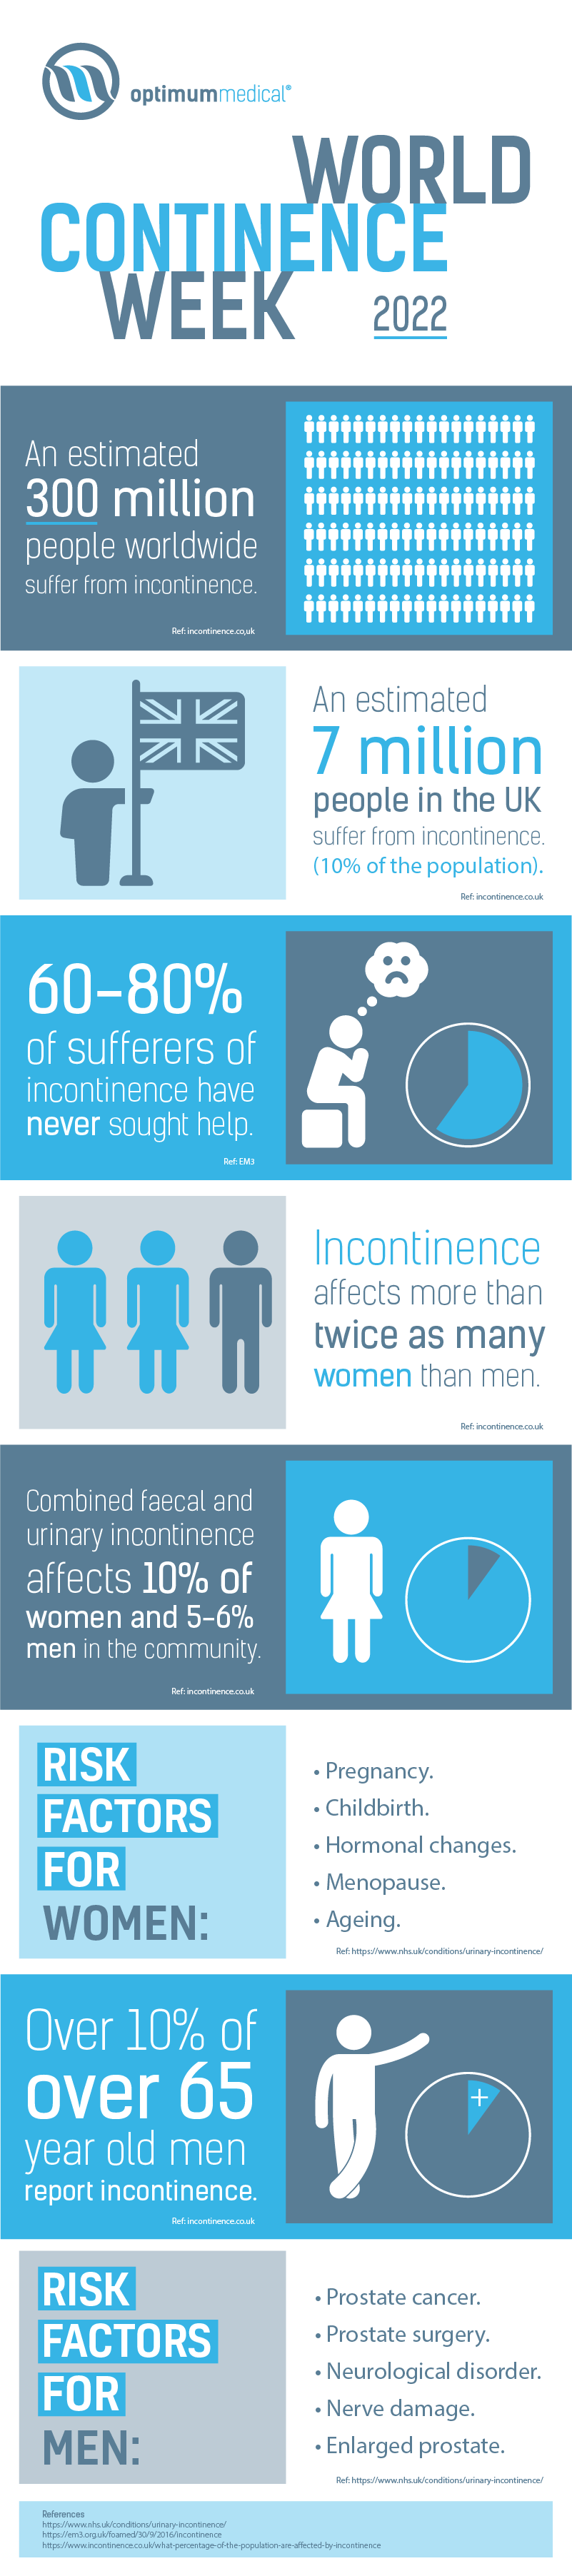 World Continence Week infographic